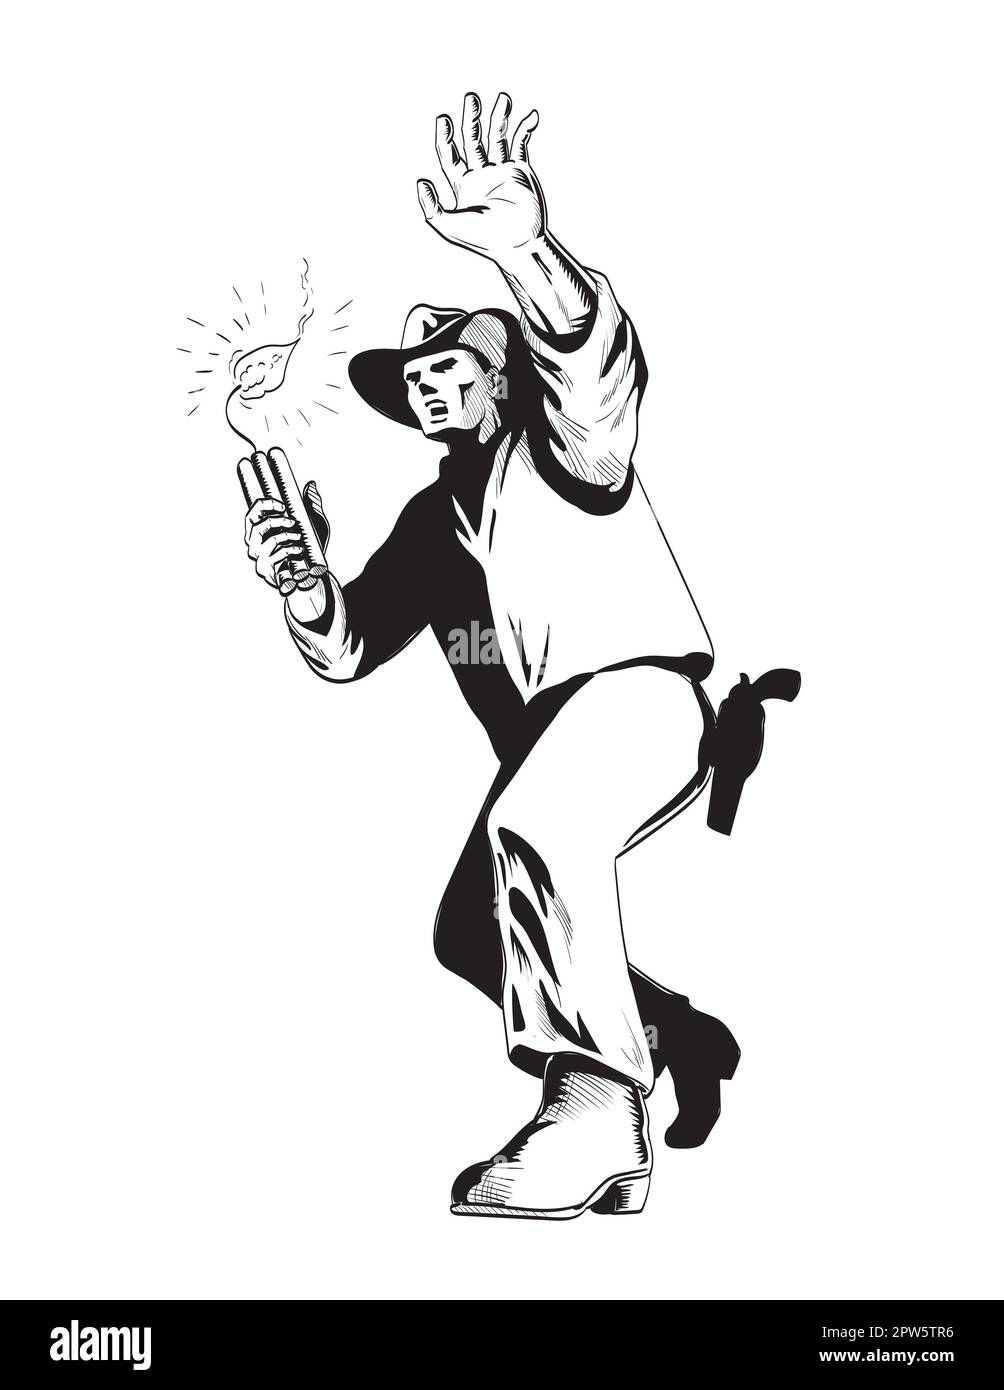 Comics style drawing or illustration of a cowboy throwing a bunch of dynamite stick or TNT viewed from the front in low angle on isolated background i Stock Photo